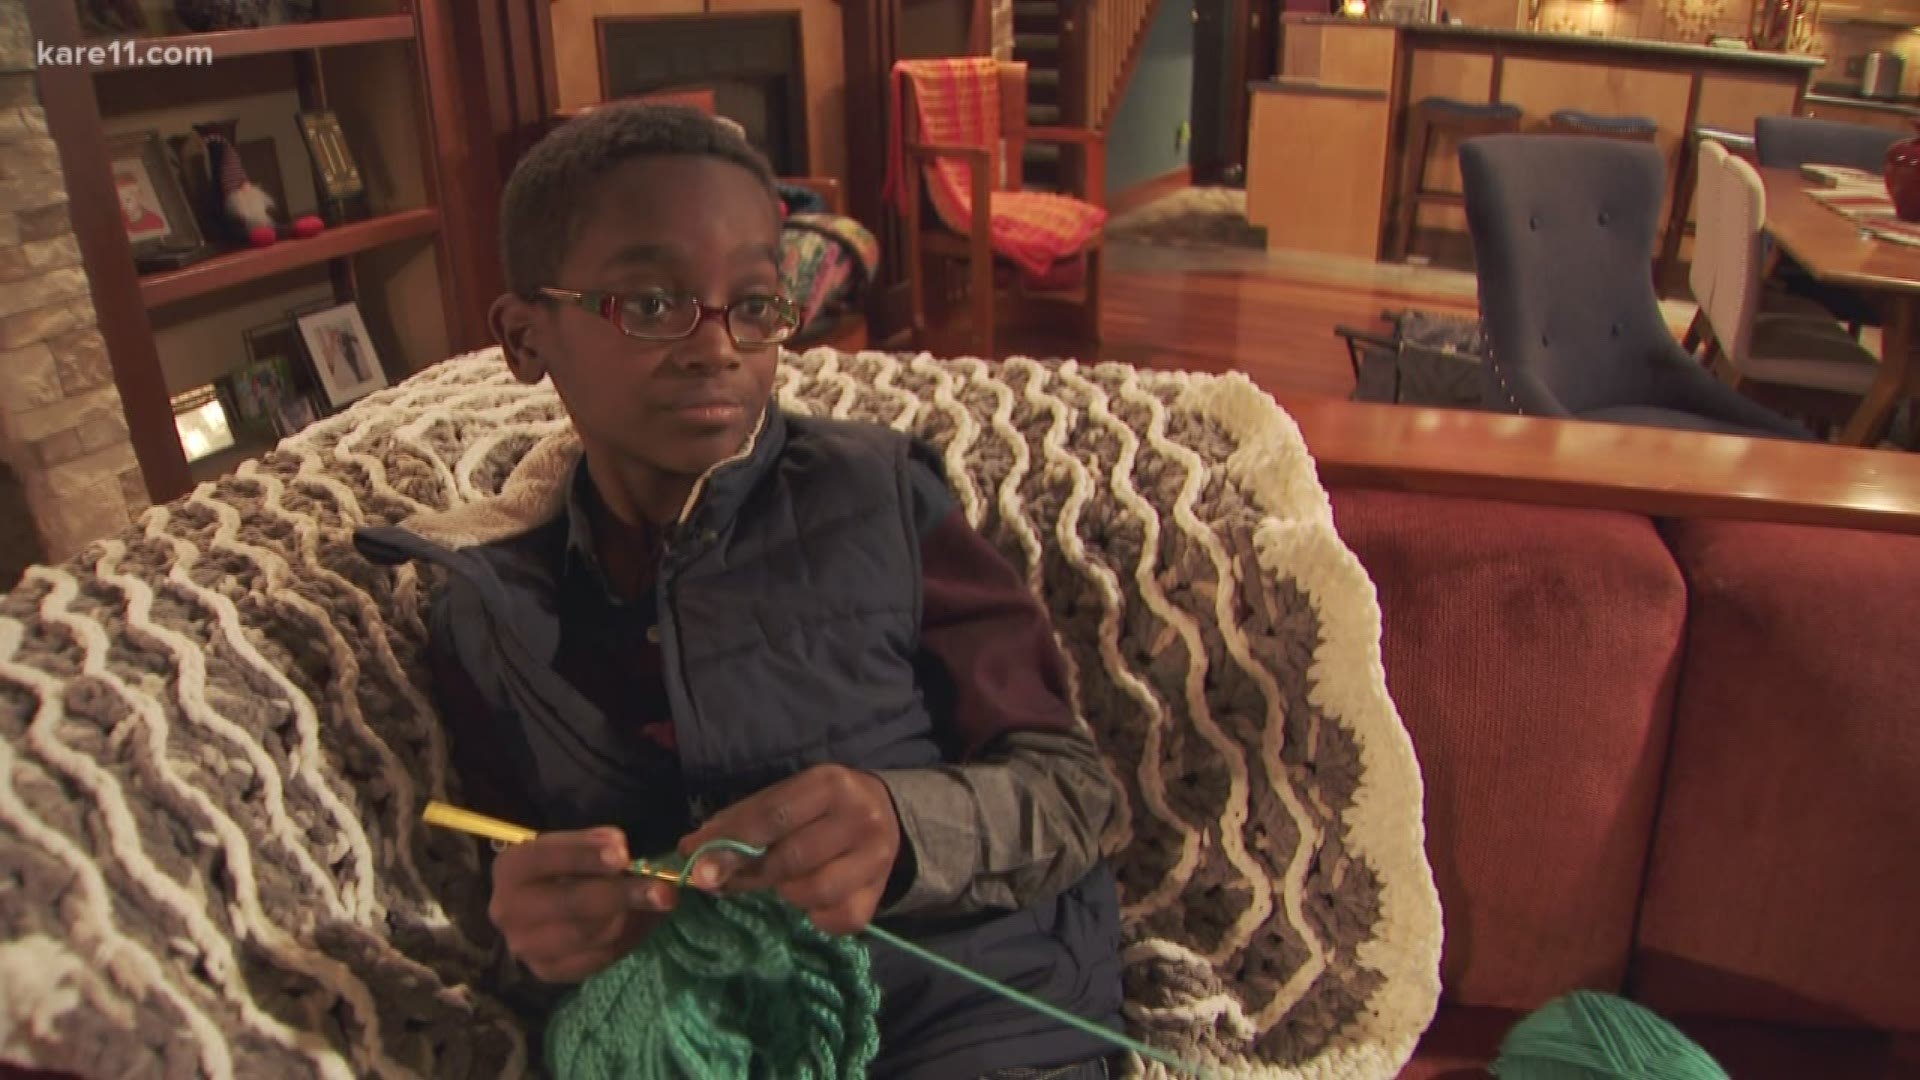 11 Year Old Wisconsin Boy Is Crocheting Prodigy Kare11 Com,Temporary Countertop Covers